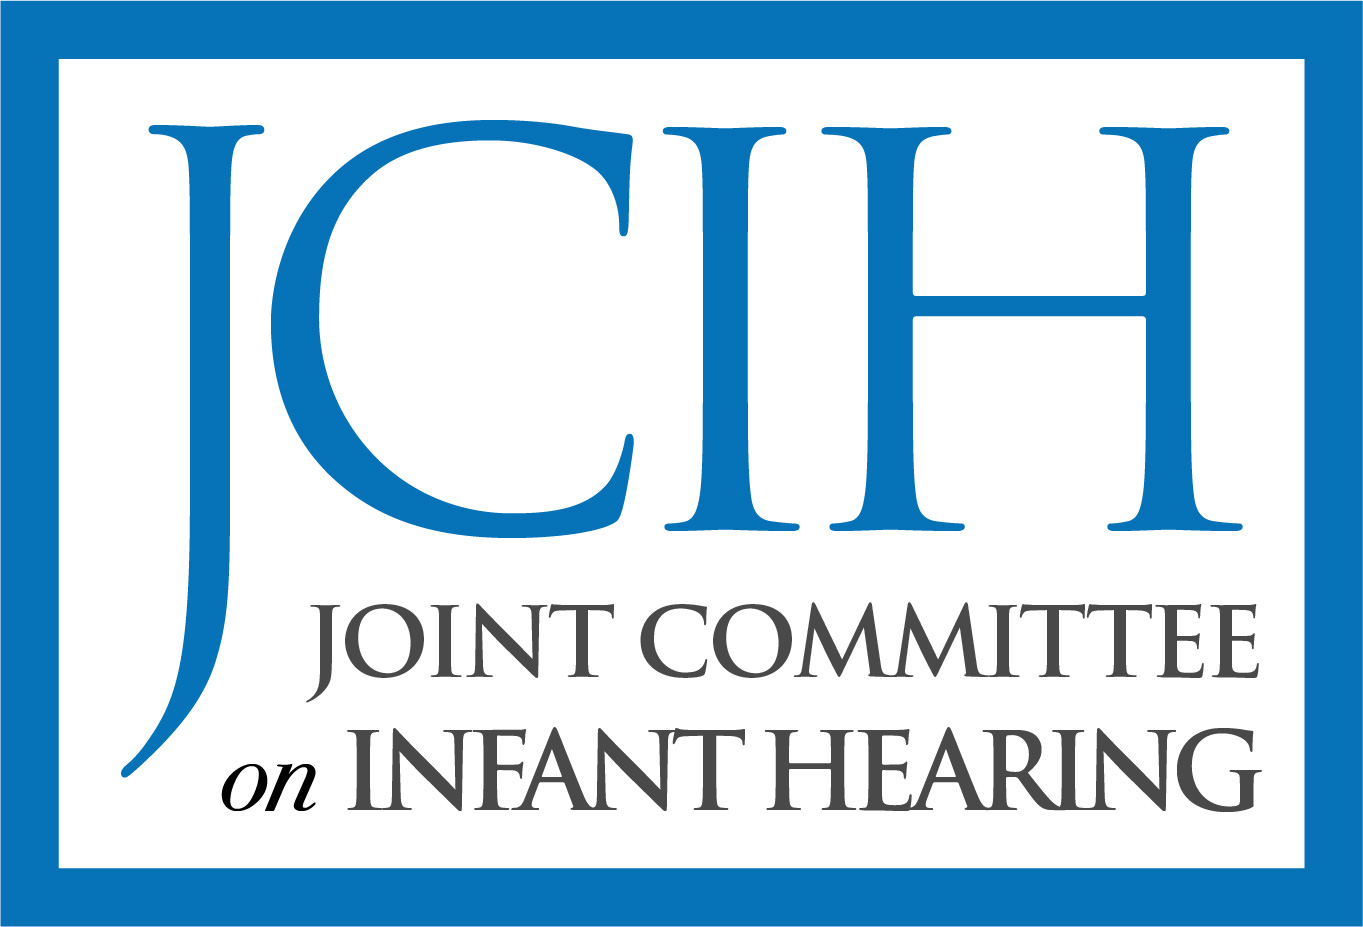 JCIH: Joint Committee on Infant Hearing